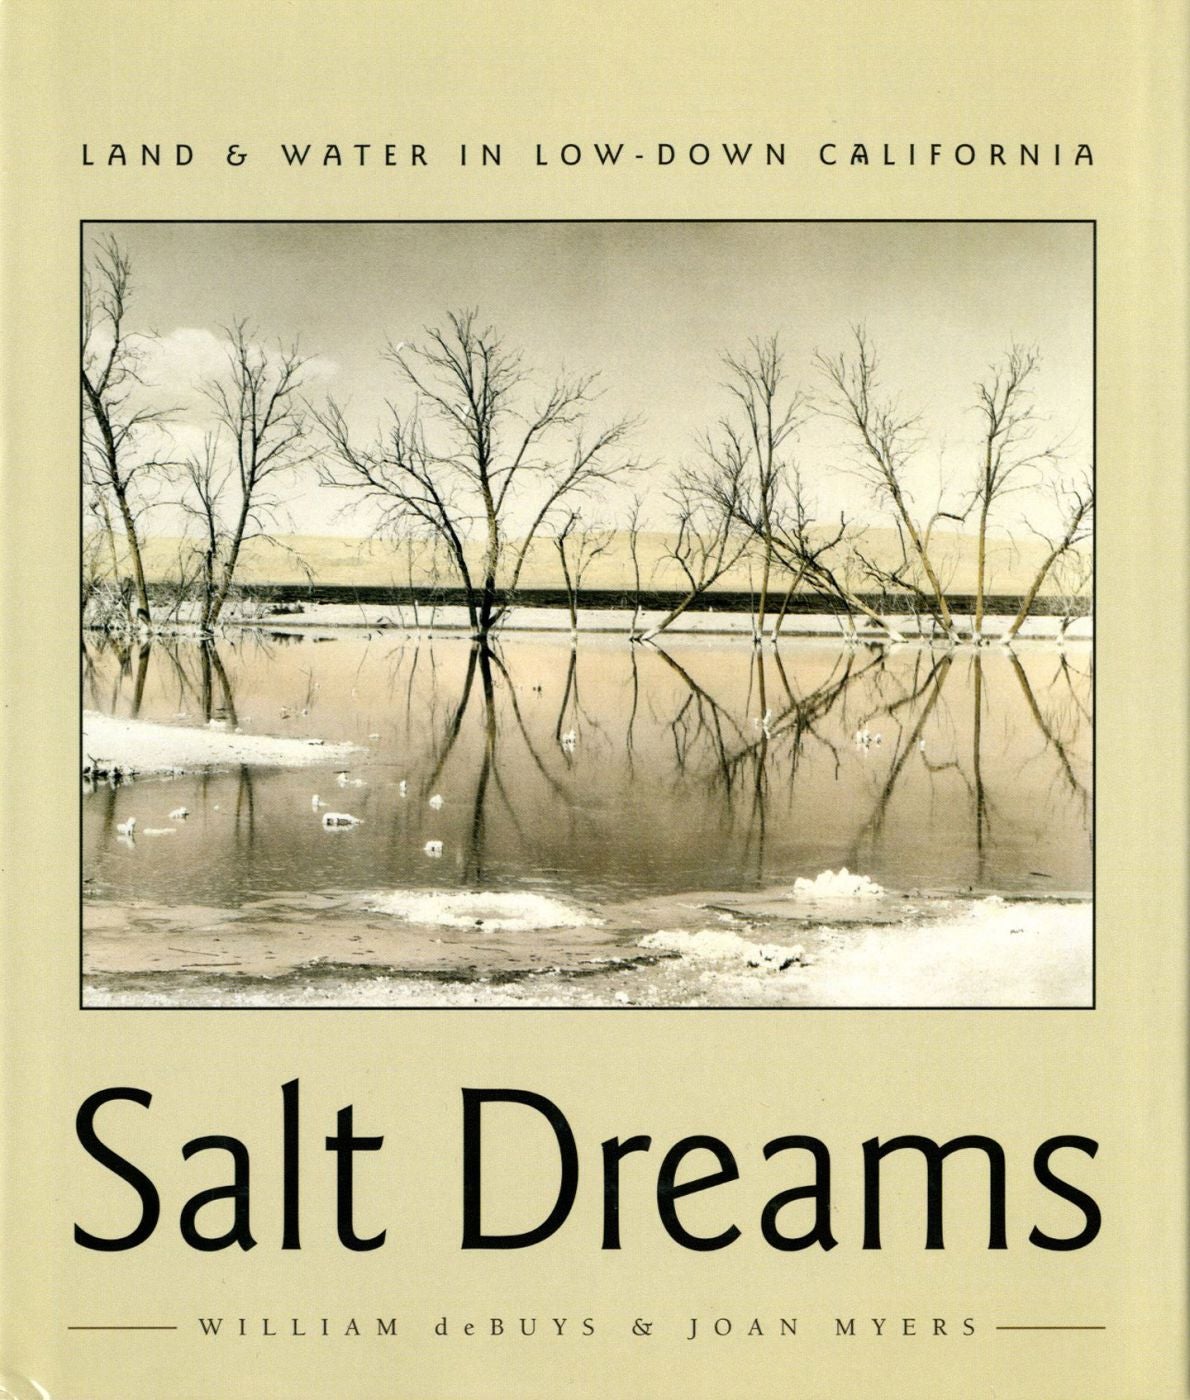 Salt Dreams: Land & Water in Low-Down California [SIGNED ASSOCIATION COPY]